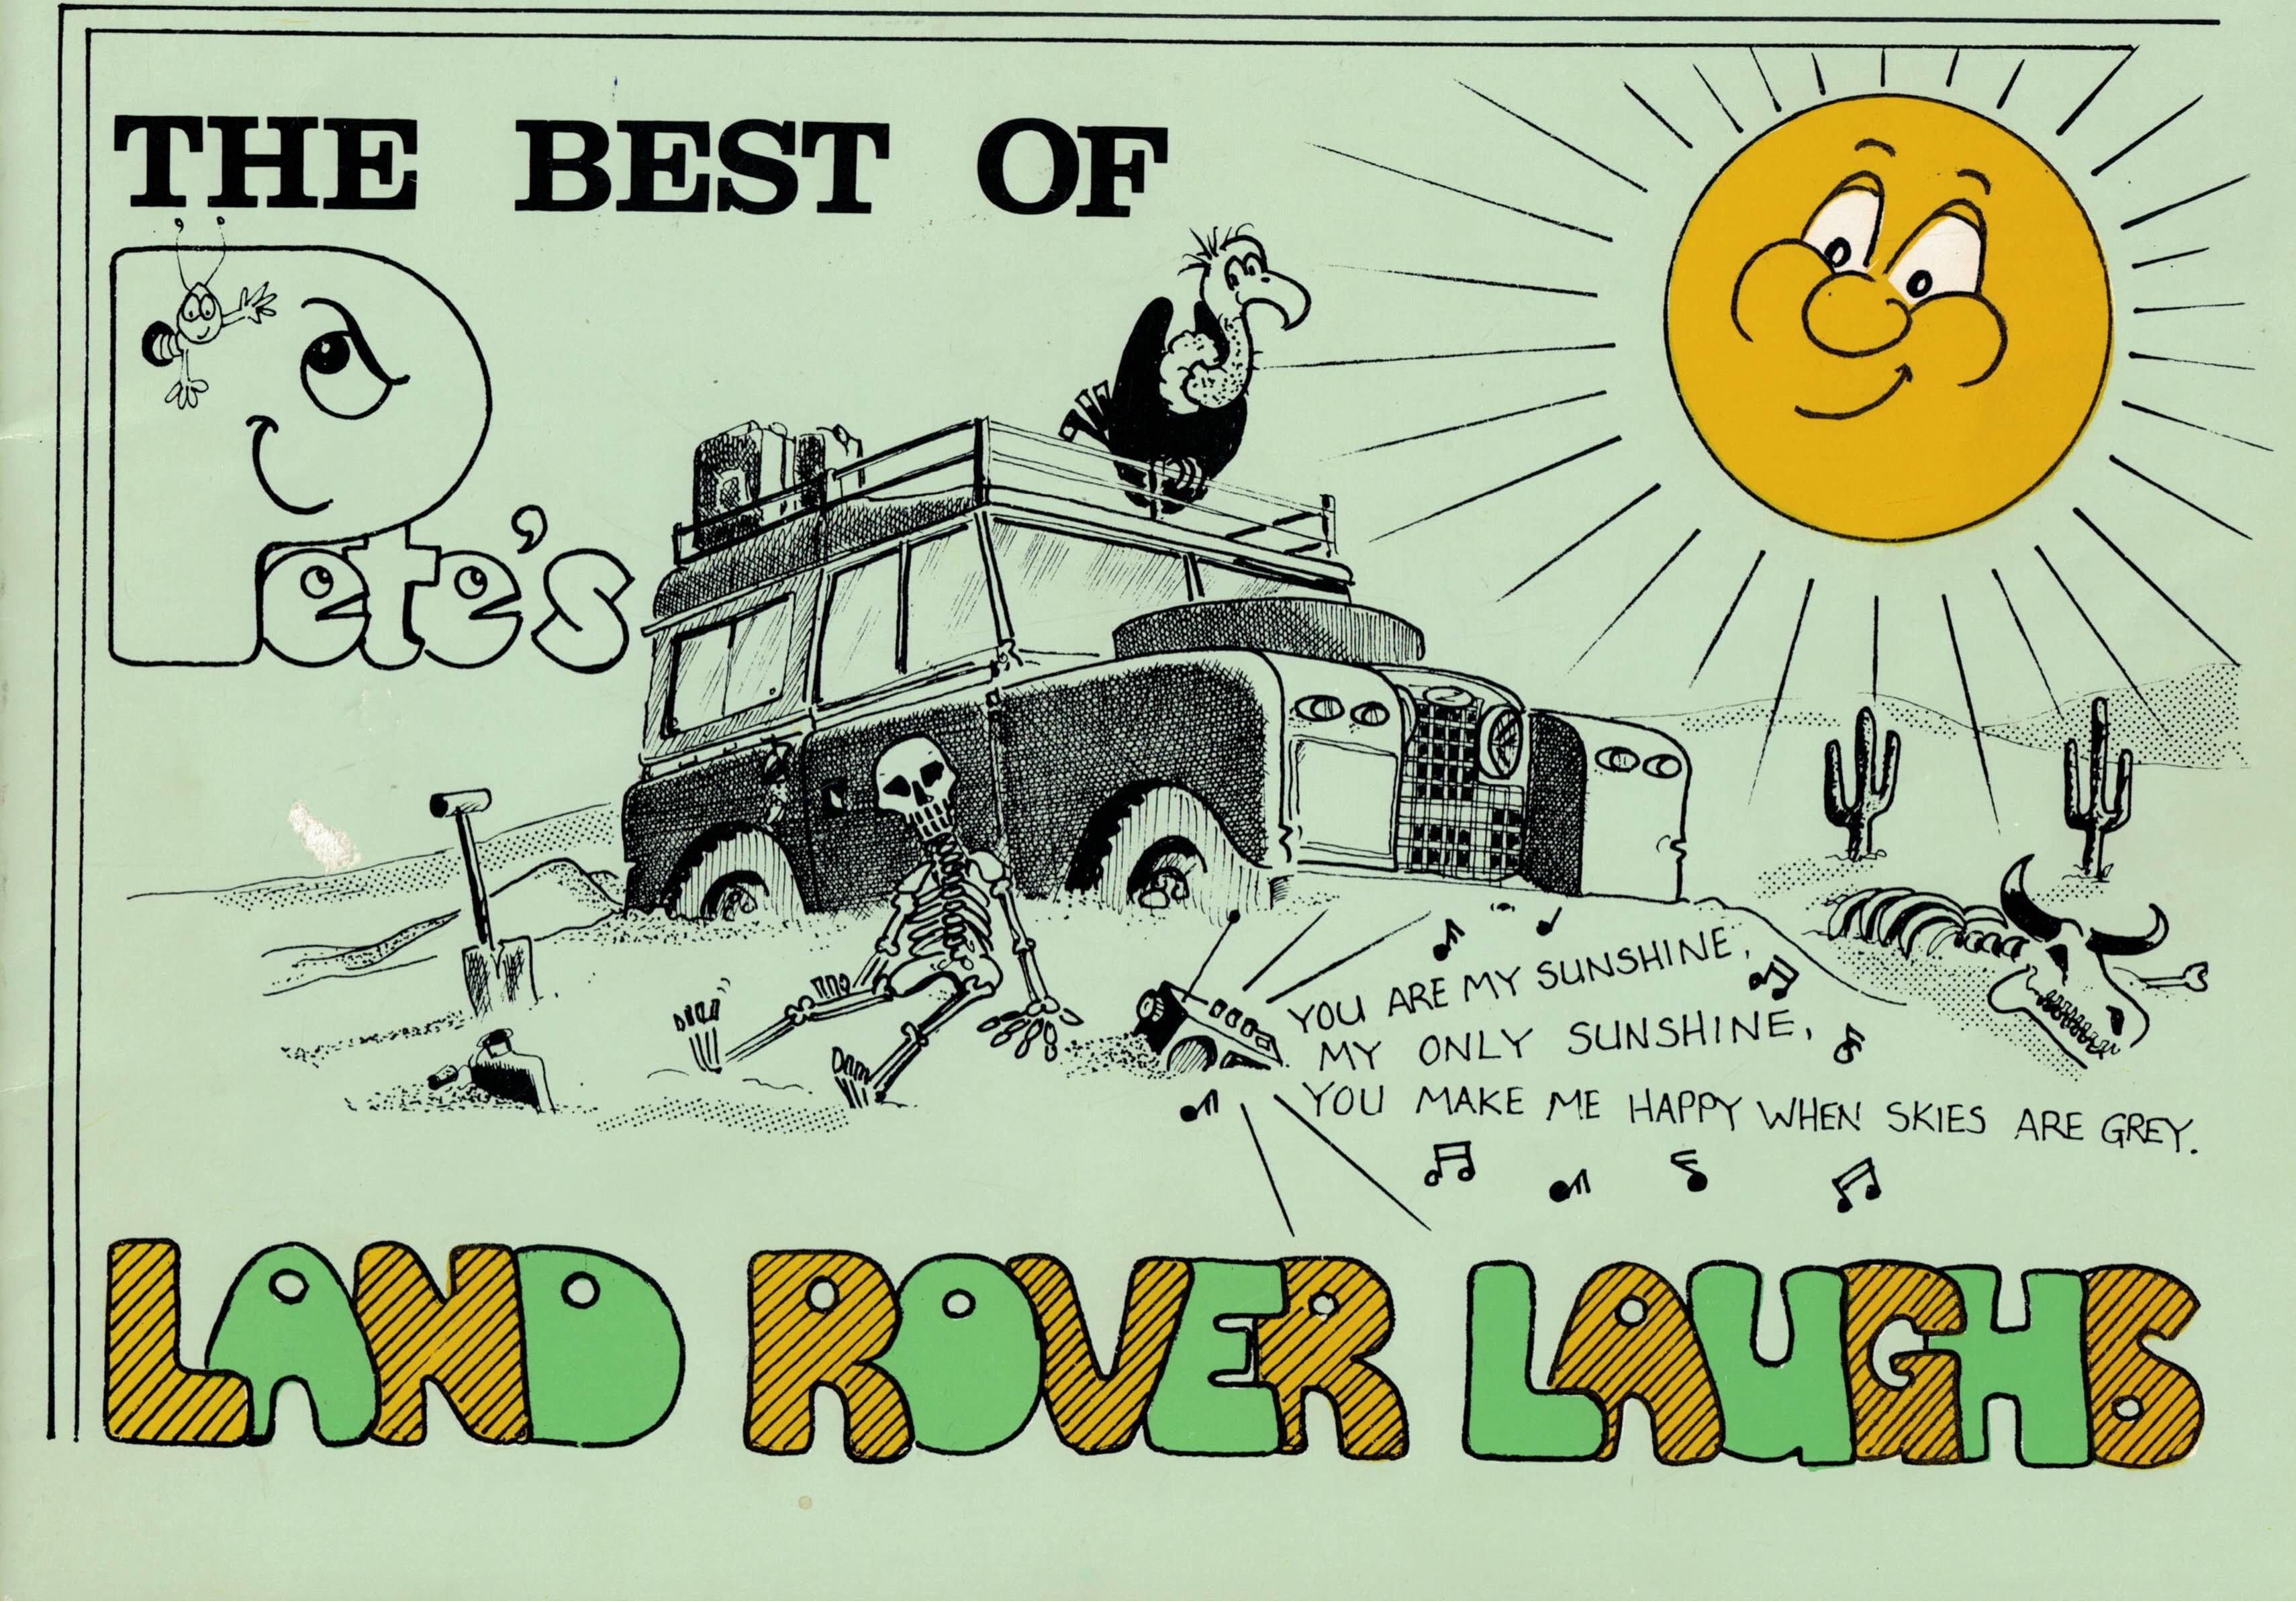 The Best of Pete's Land Rover Laughs